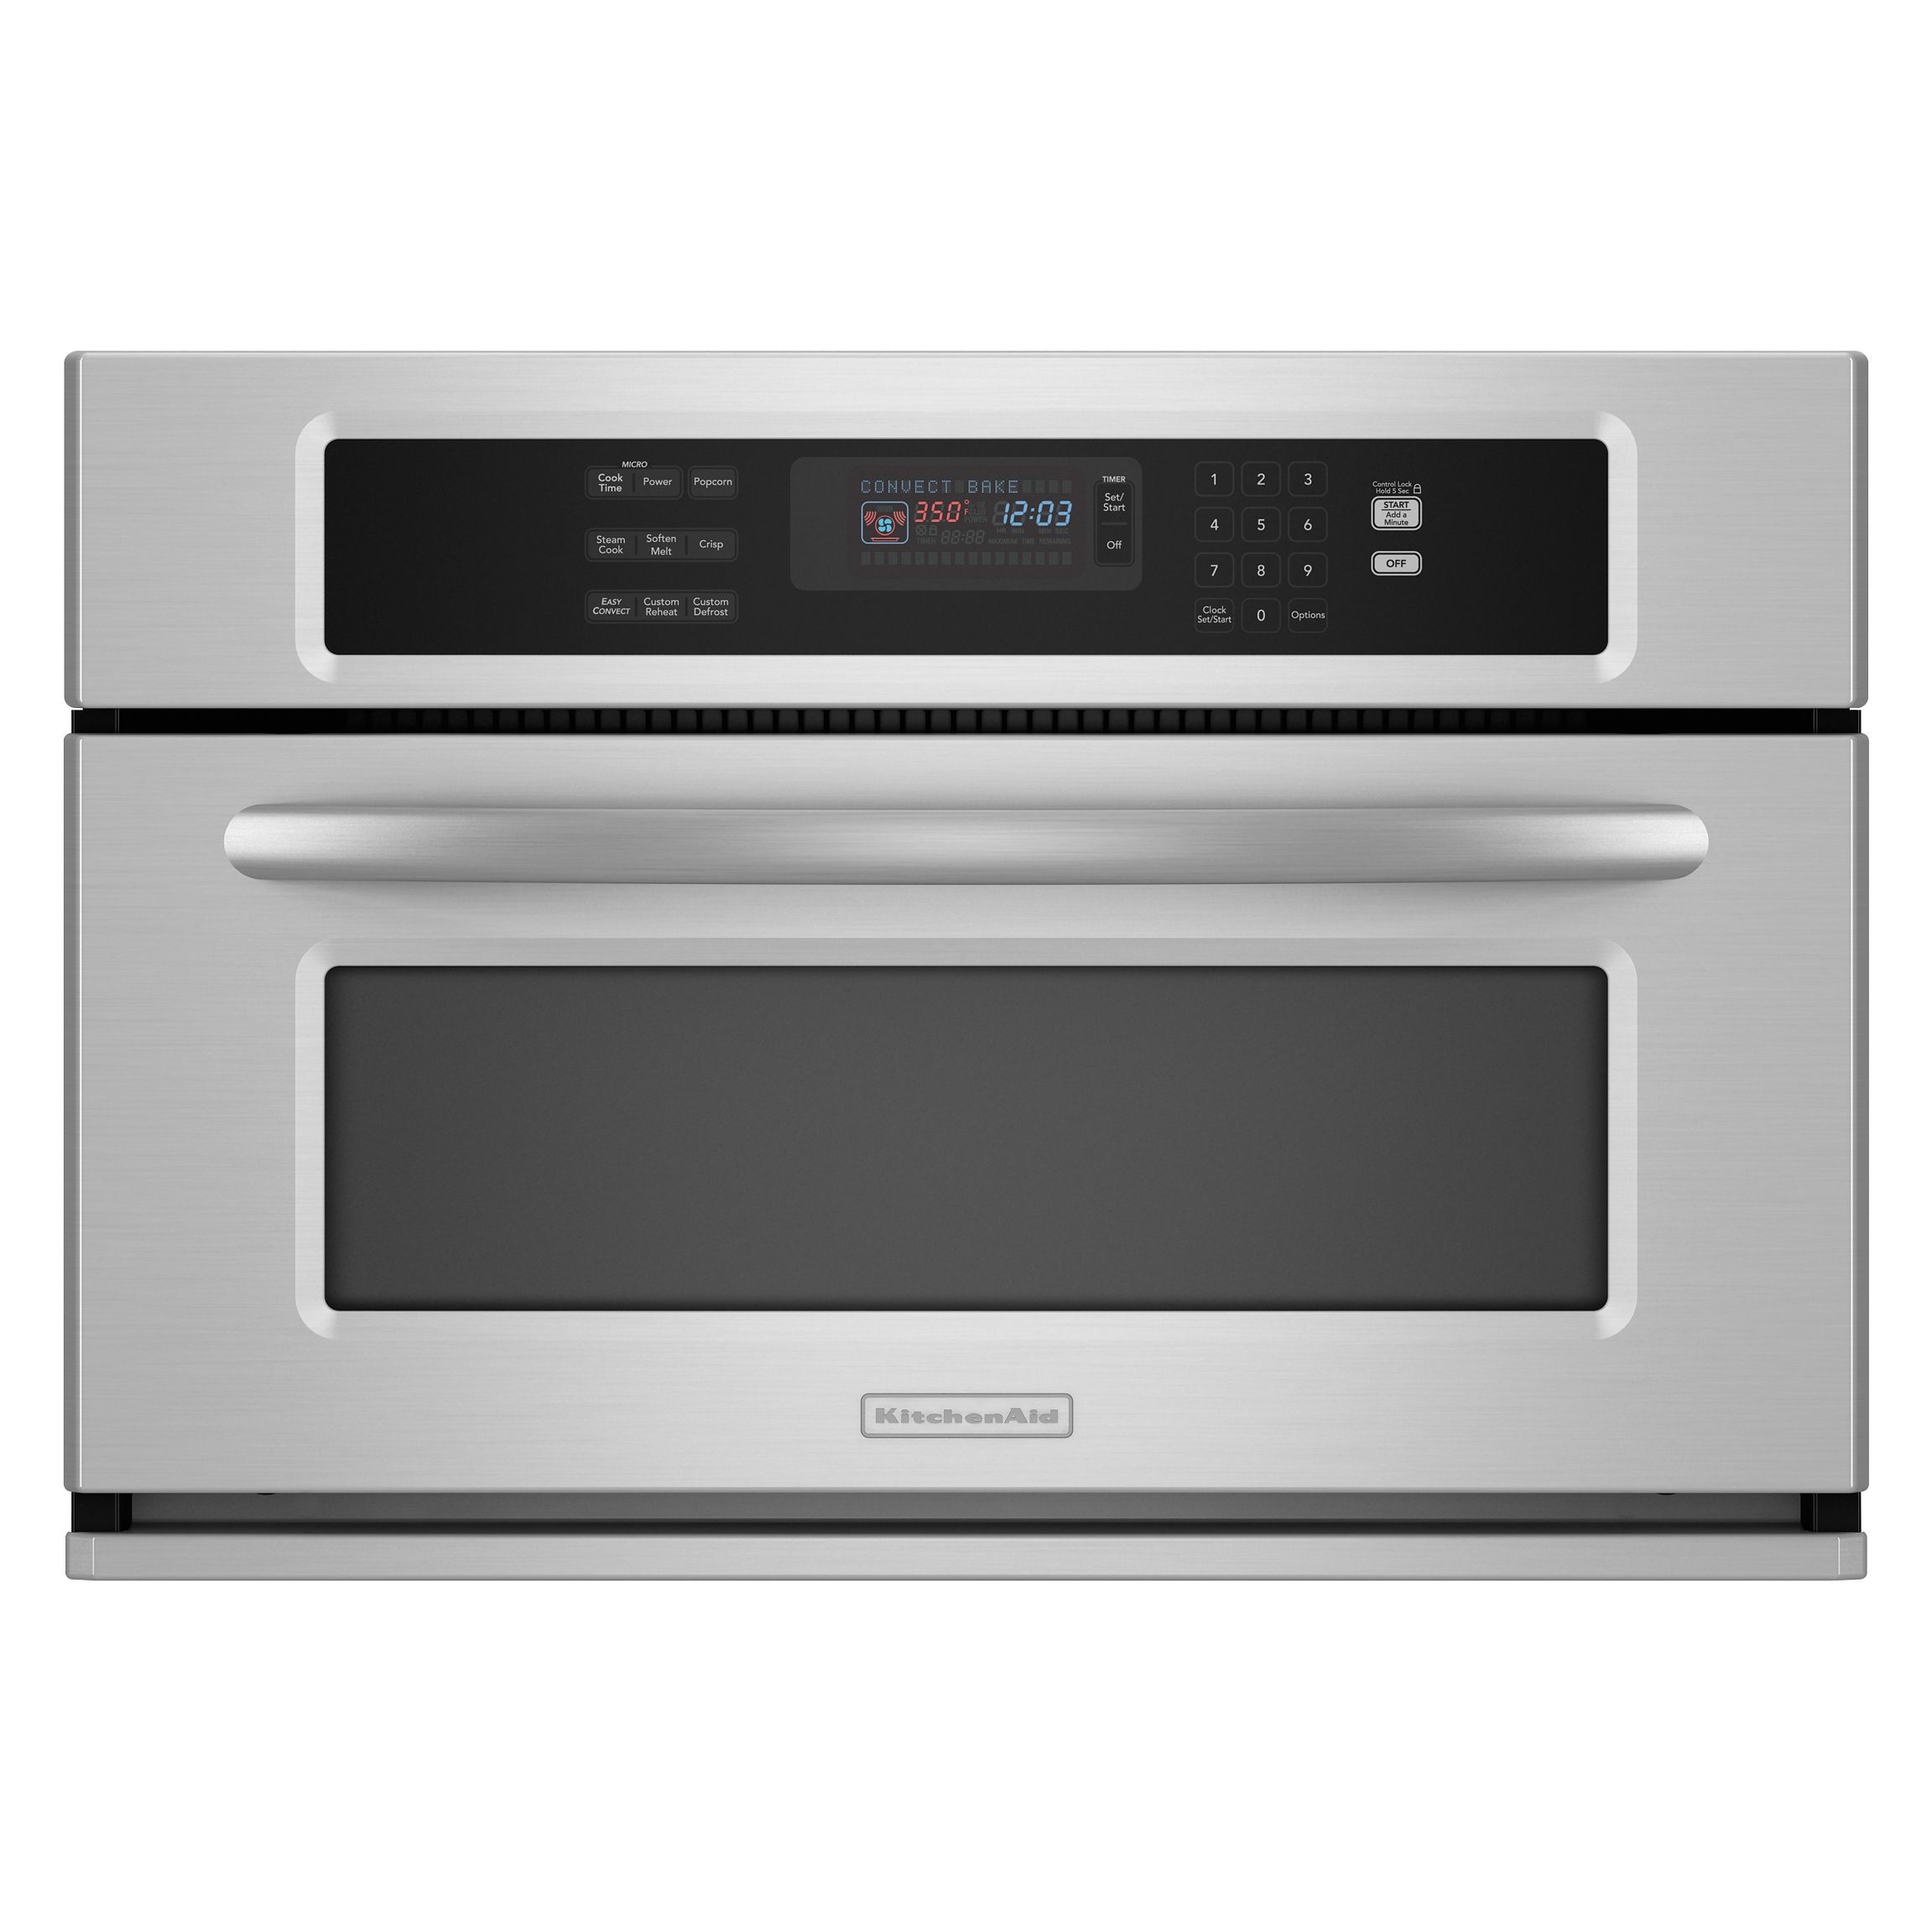 KitchenAid 27 1.4 cu. ft. Built-in Microwave Oven/Convection Oven Stainless Steel